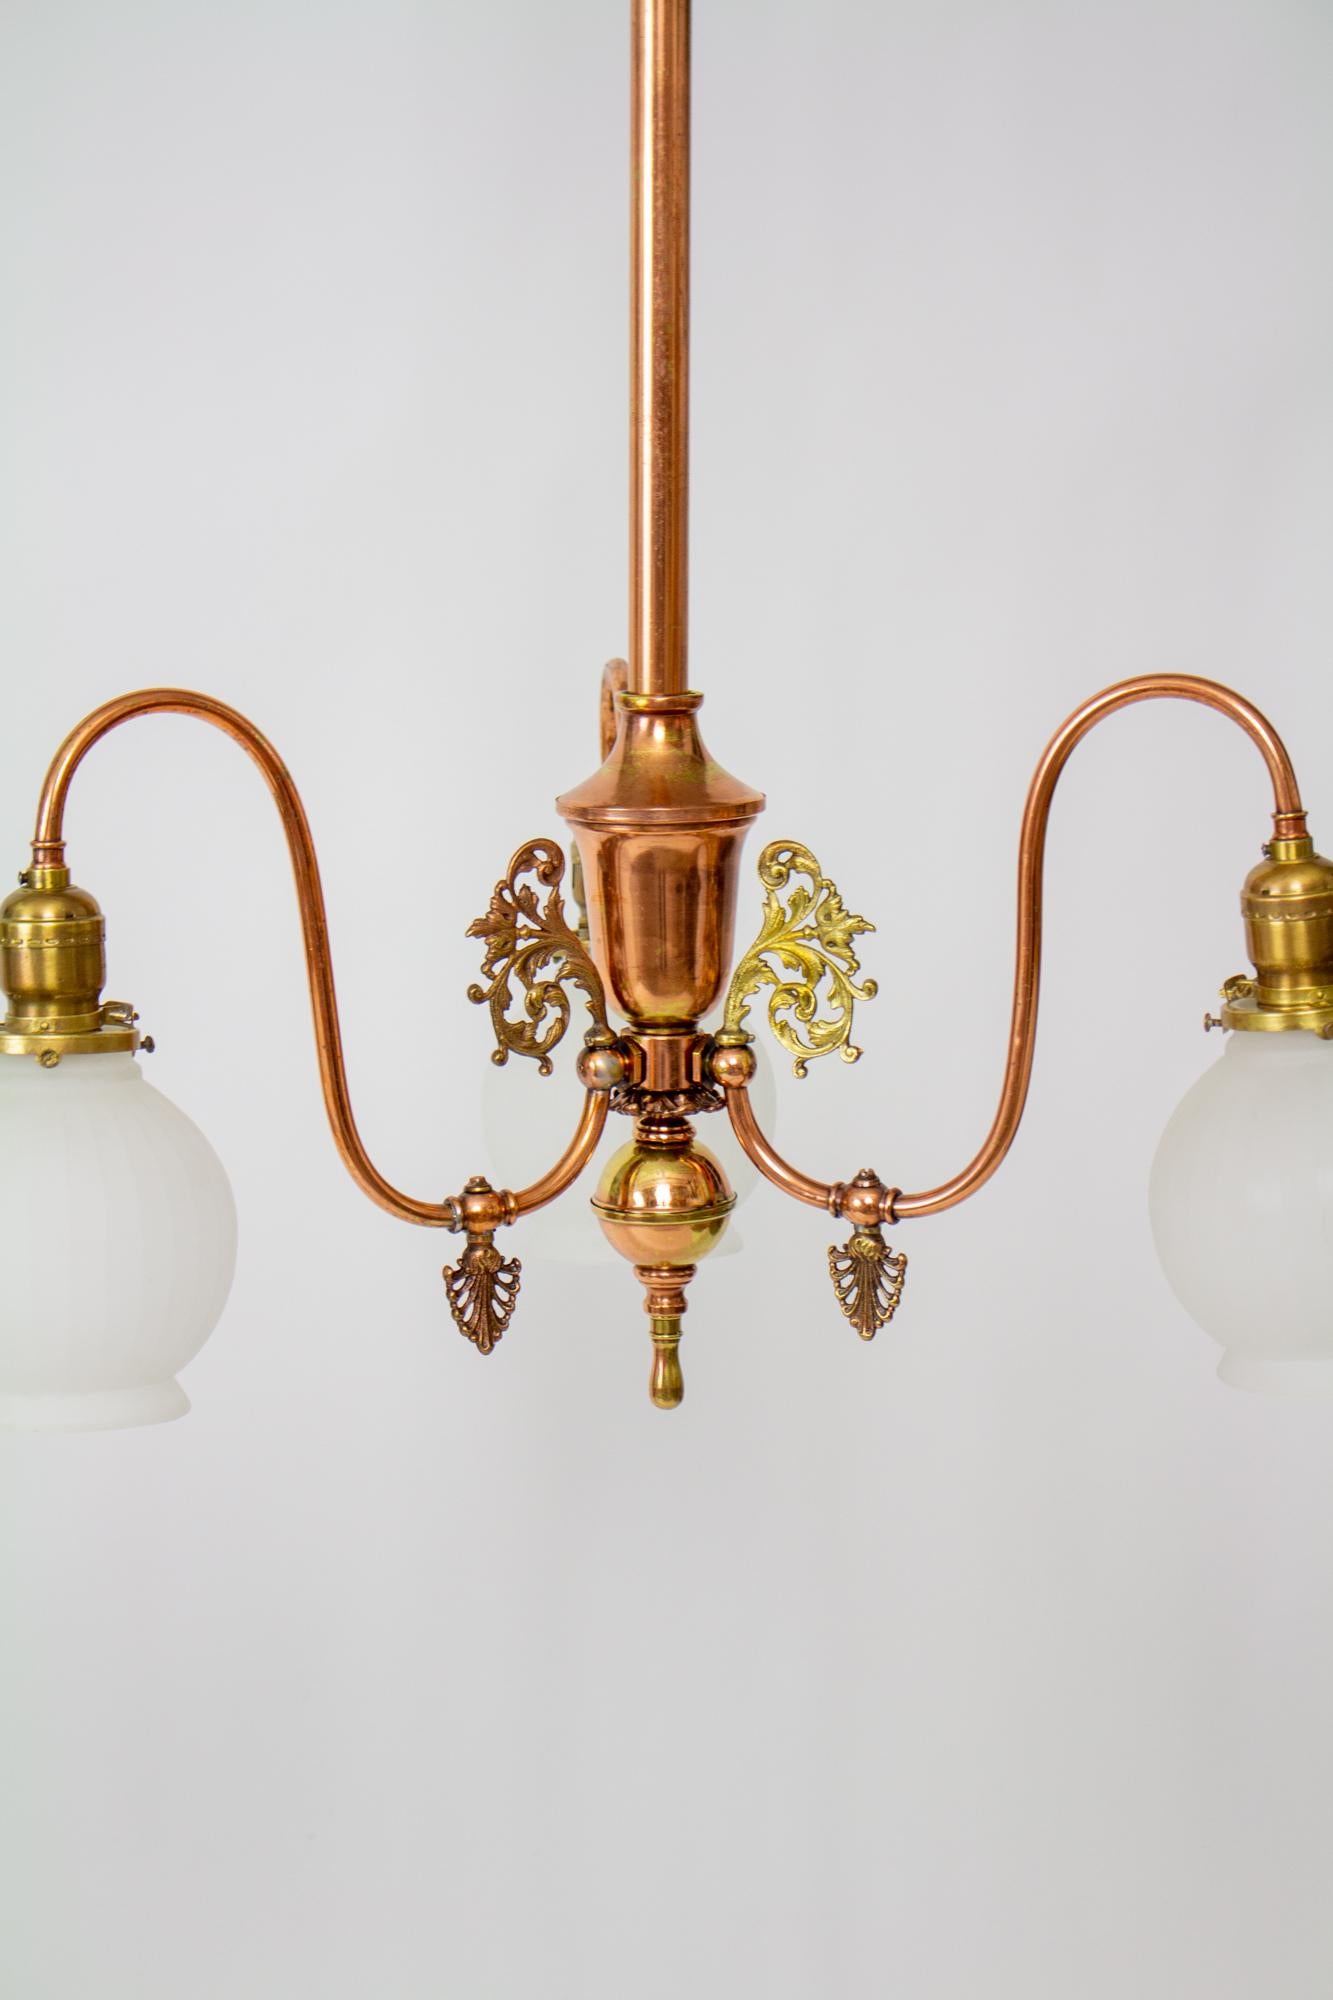 19th century Gasolier, with three downfacing lights. Originally designed with downfacing Welsbach mantle burners, now electrified with late 19th century 2 ¼ clamp shade holders. Original gas cocks have been immobilized for safe electrification.